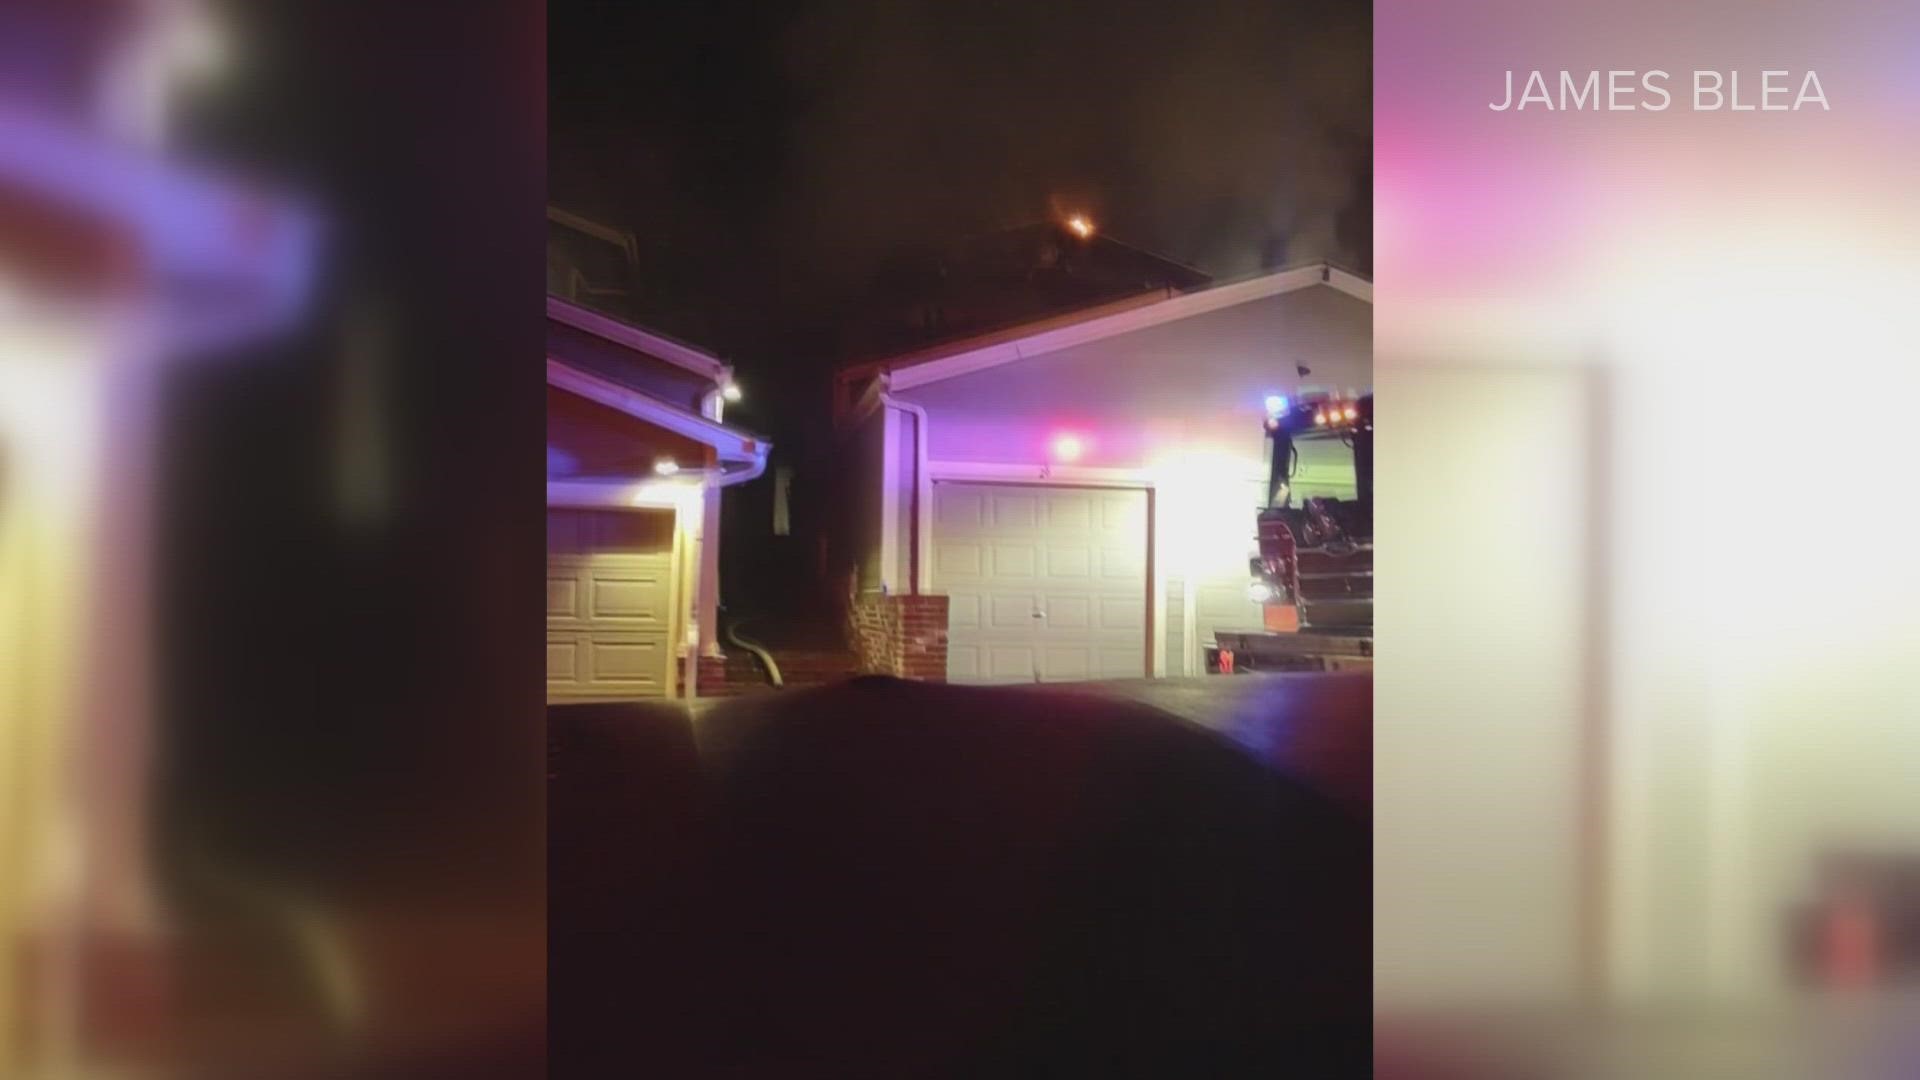 Golden Police is looking for a person of interest following an incident at a townhome, after which the building then caught fire.